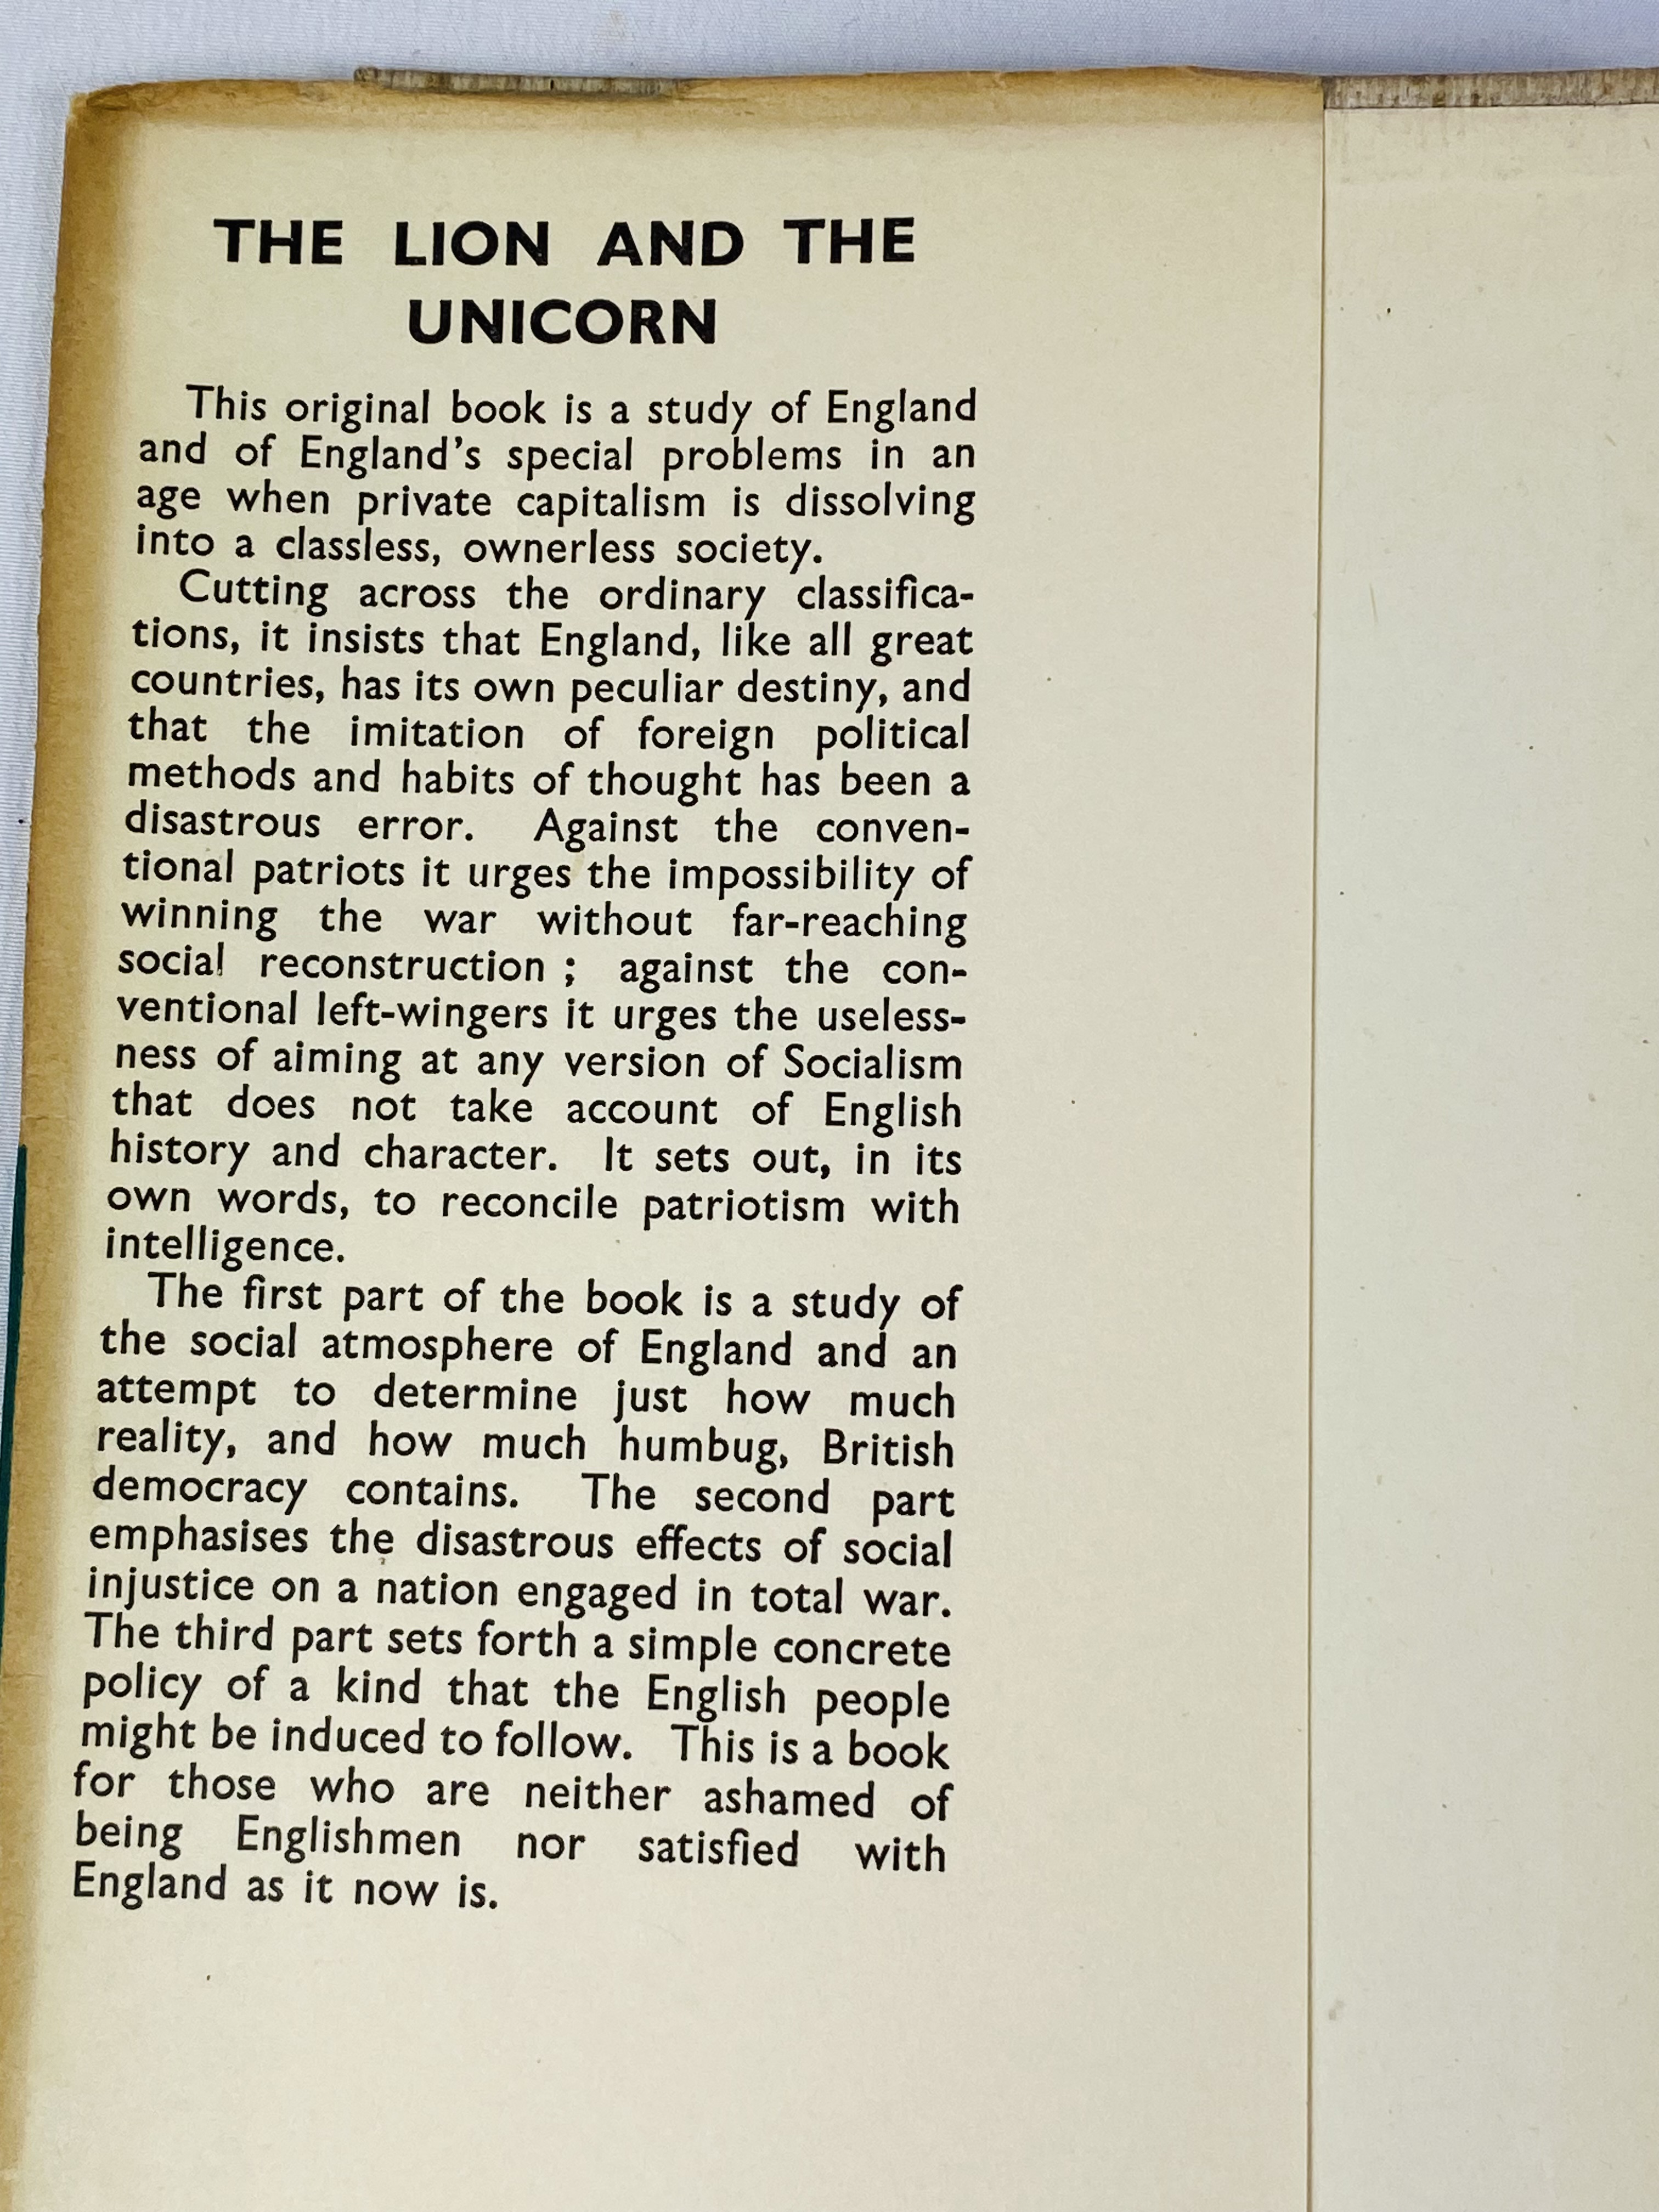 George Orwell, The Lion and the Unicorn, Searchlight Books No. 1, 1st edition - Image 2 of 4